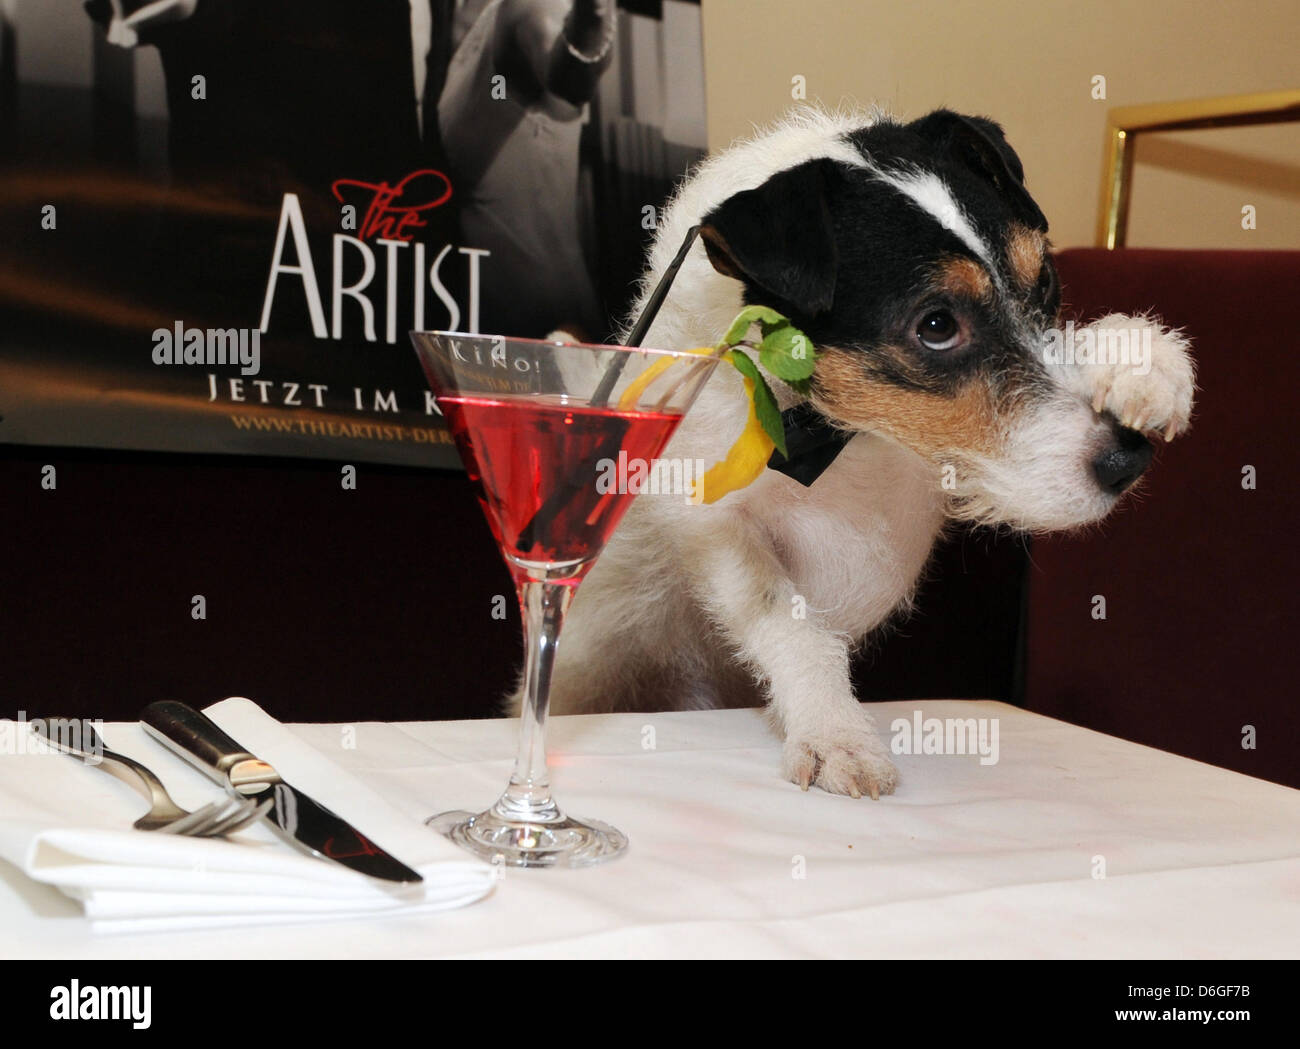 Parson Russell Terrier Archie, the German premiere double of the American dog star Uggy from the movie 'The Artist', sits with a cocktail at a table in Restaurant Borchardt during the Berlin International Film Festival in Berlin, Germany, 16 February 2012. The film is currently in cinemas. Archie's drink is alcohol-free juice made from grenadine juice. Photo: JENS KALAENE Stock Photo